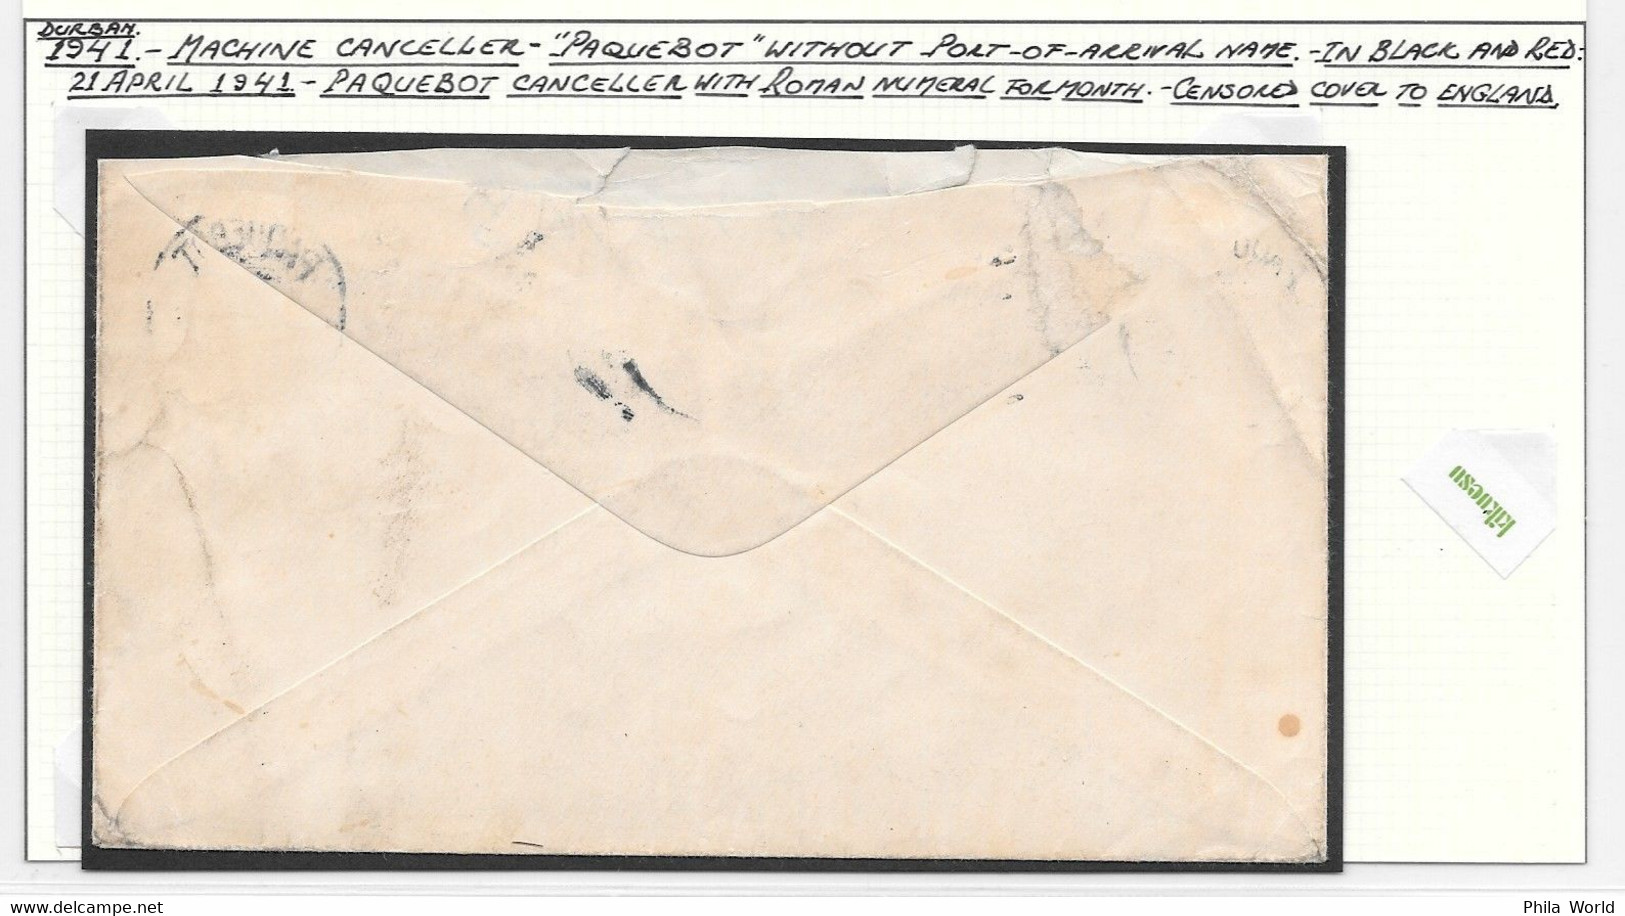 MARITIME MAIL PAQUEBOT Cancel 1941 WW2 Cover (without Port Of Arrival Name) To ENGLAND Shipley Yorkshire - Schiffahrt